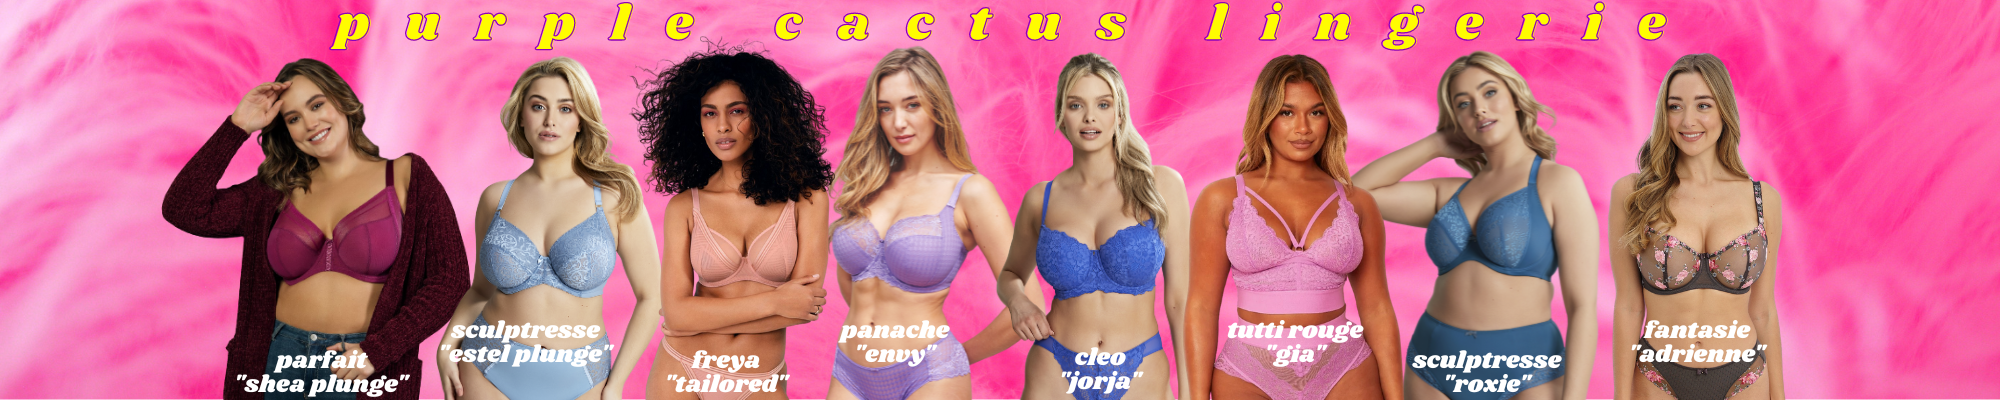 Contact Us, Comfortable Lingerie Canada